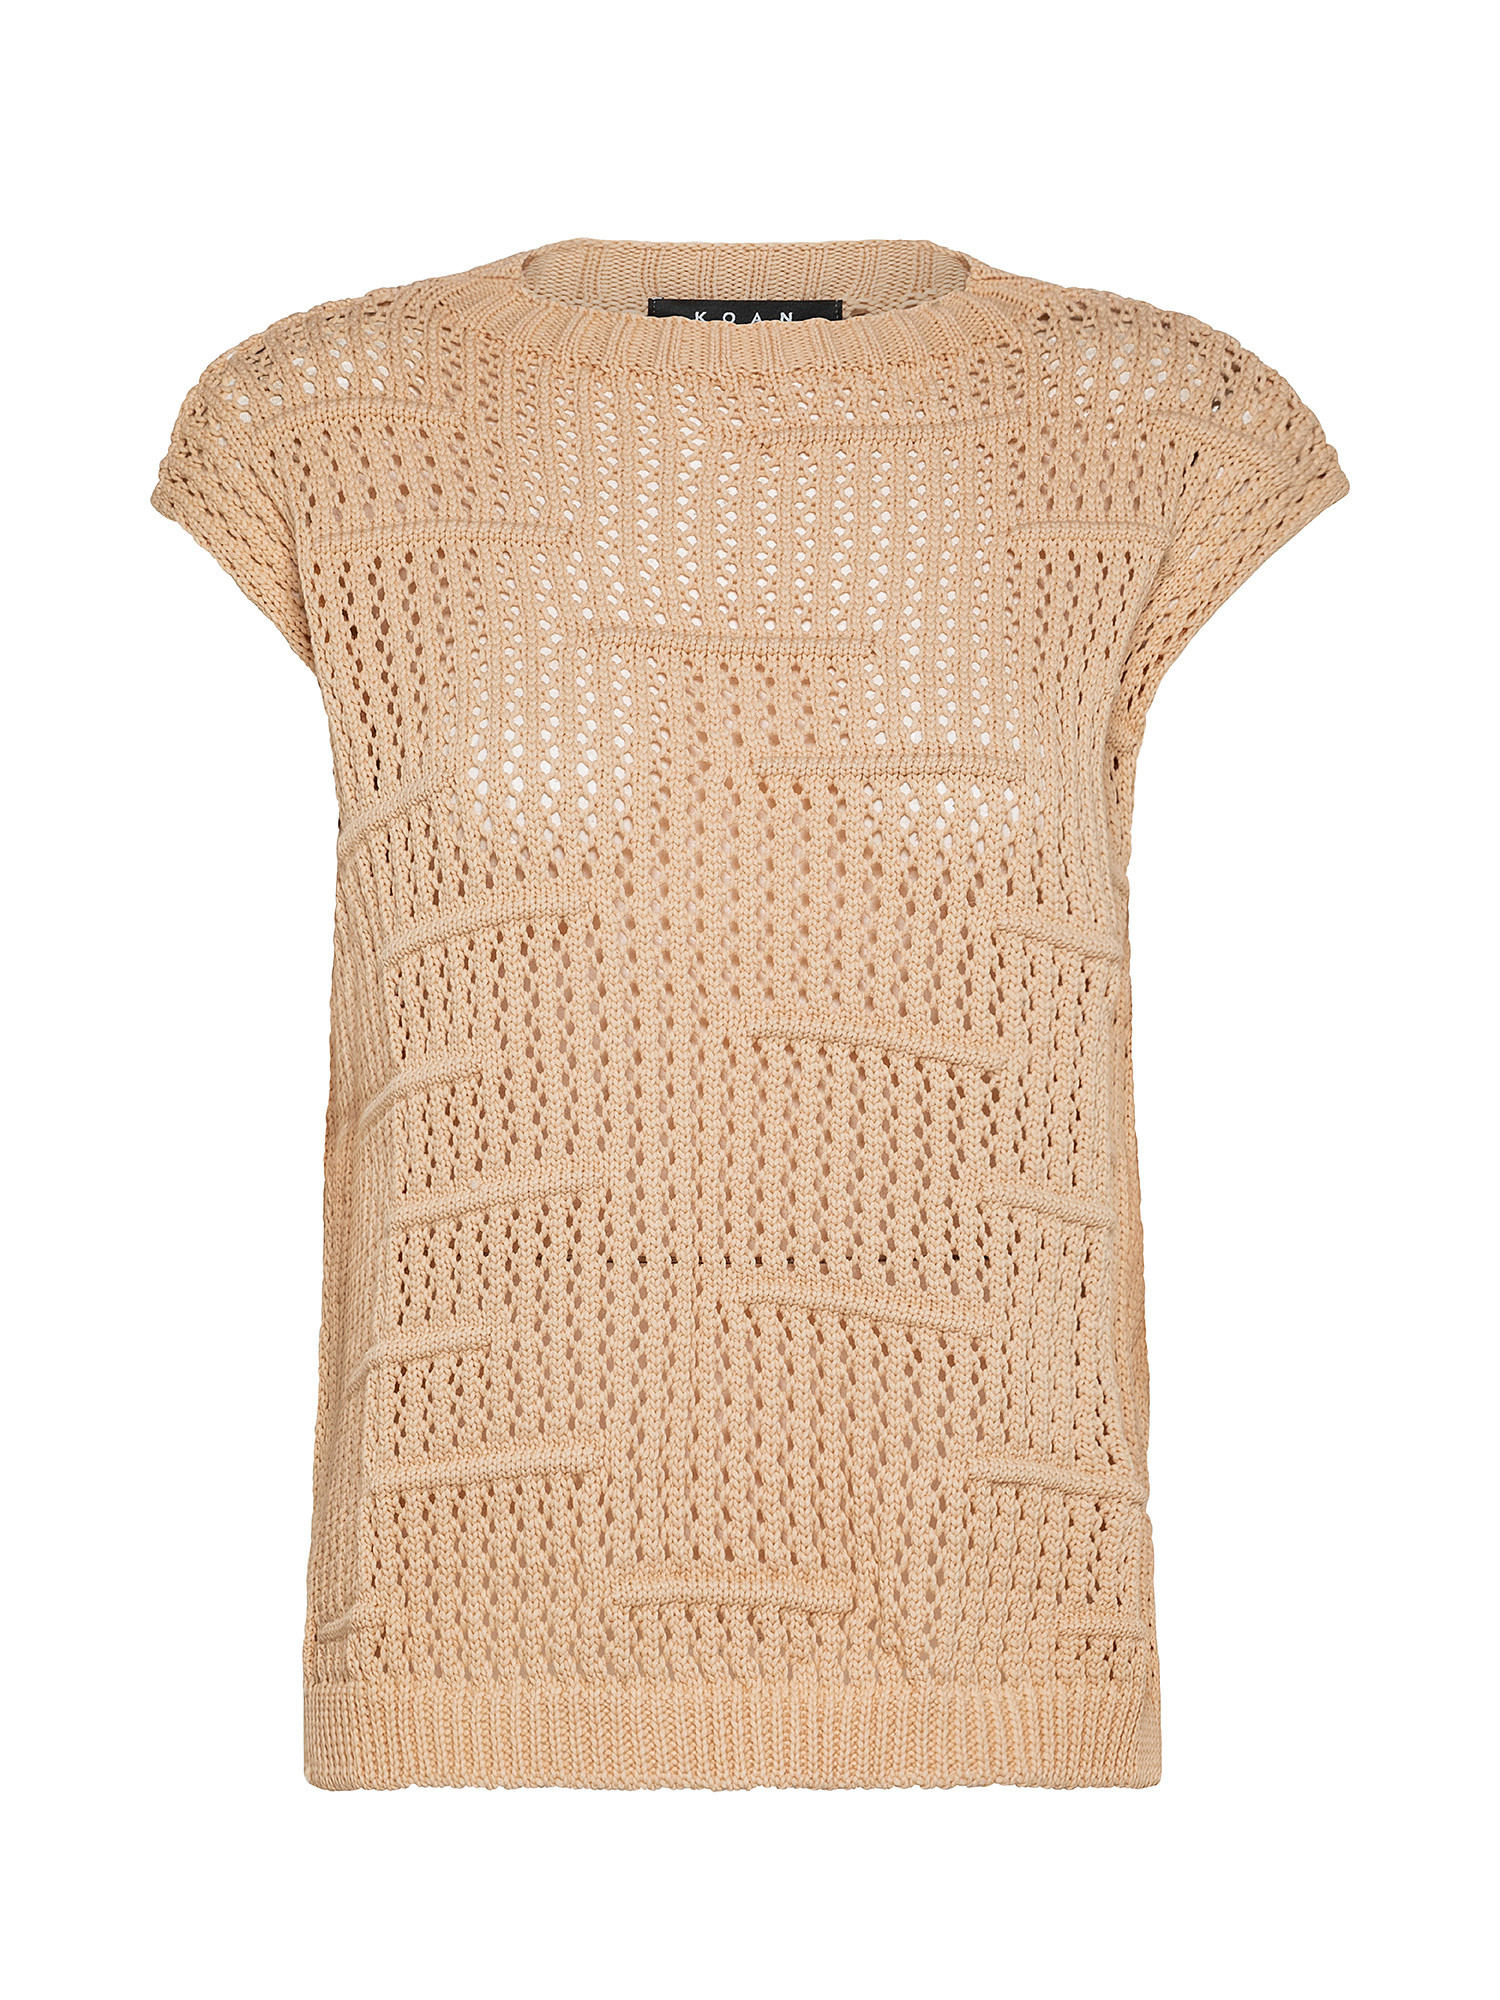 Tricot sweater, Beige, large image number 0